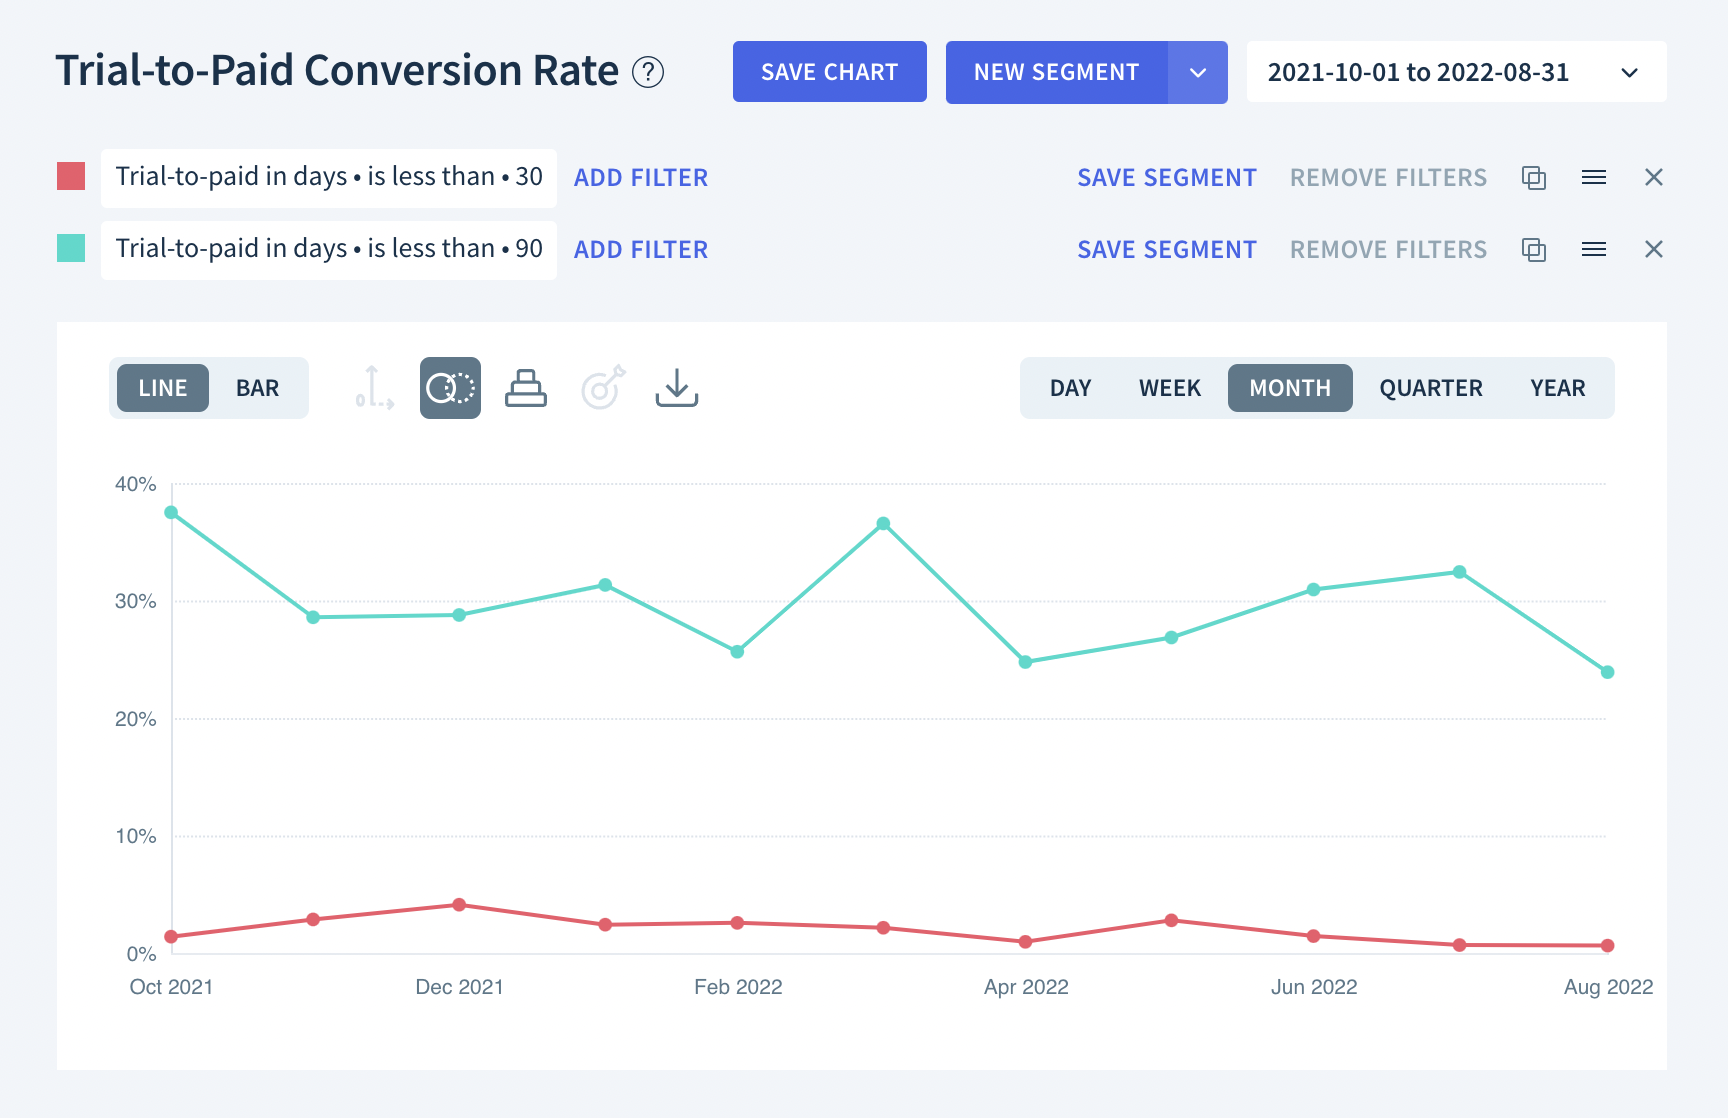 Trial-to-Paid Conversion Rate chart comparing 30-day trial-to-paid conversion rate against 90-day trial-to-paid conversion rate